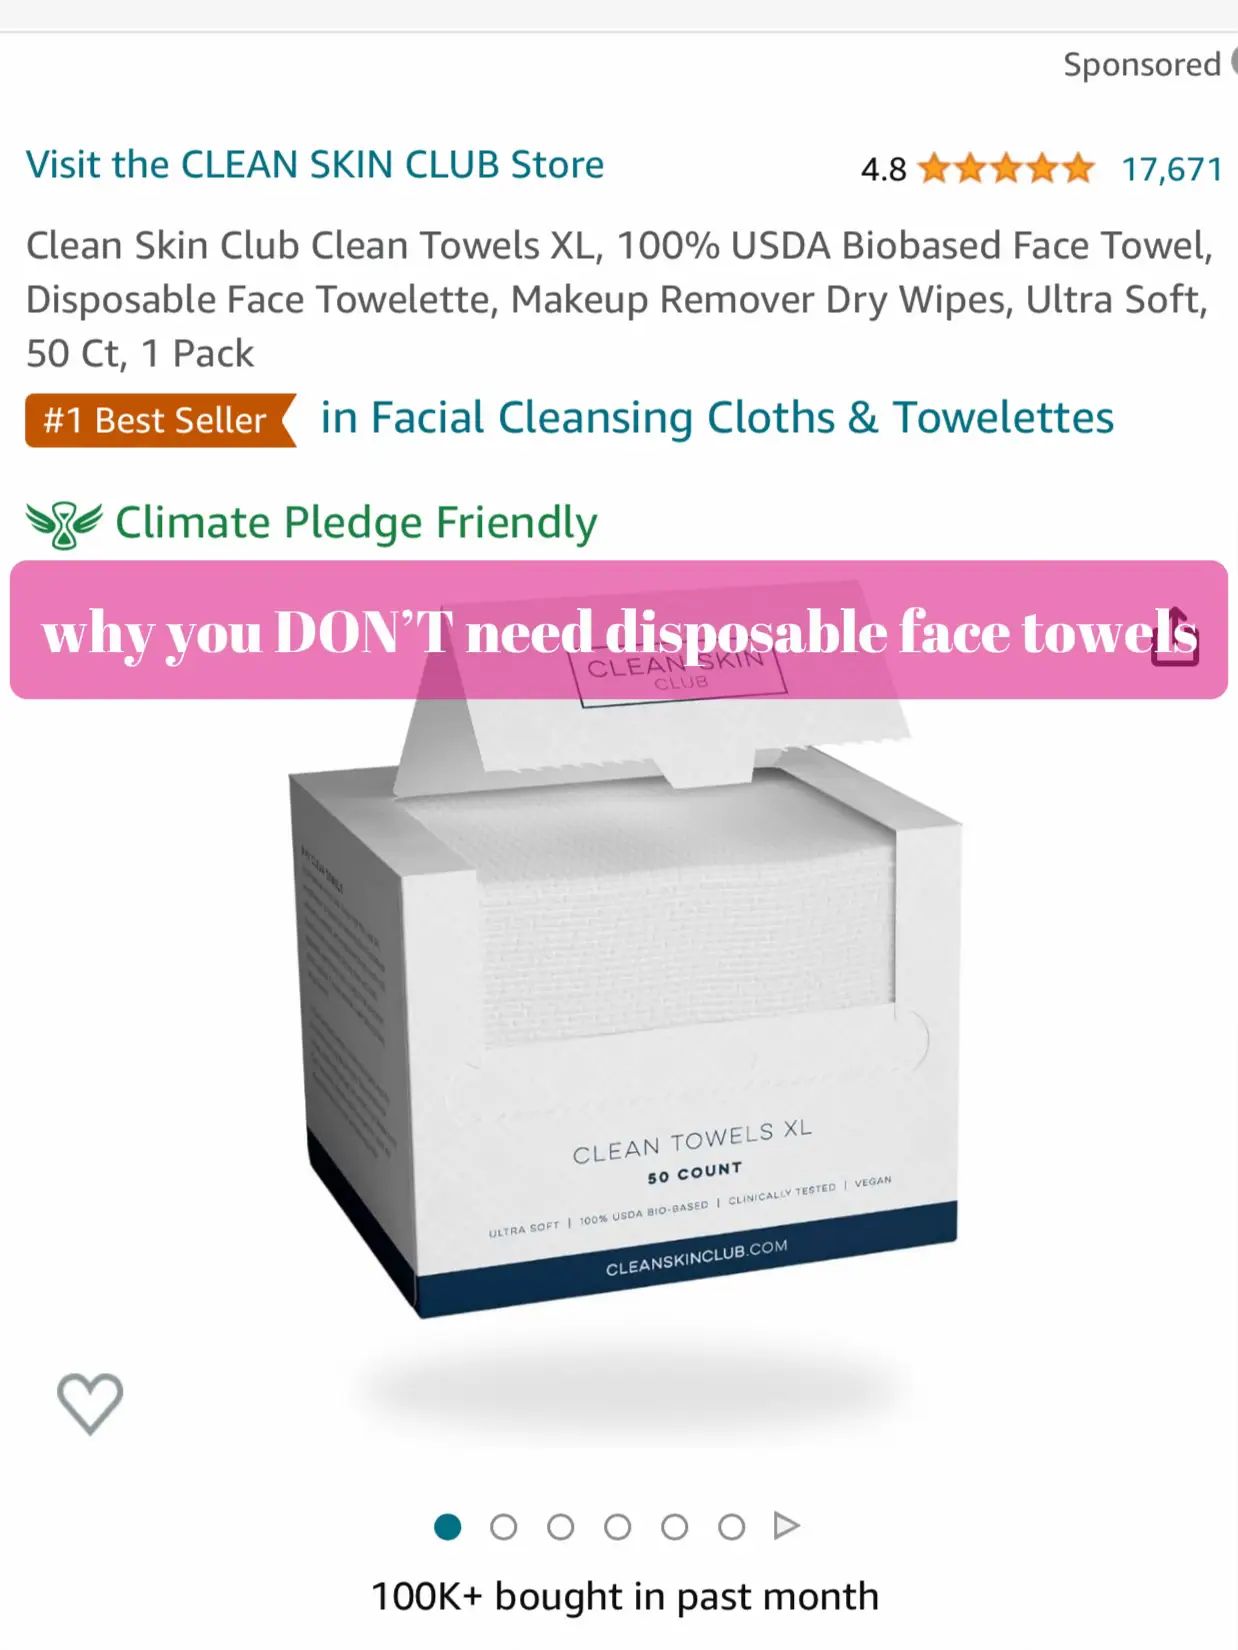 Clean Skin Club XL Disposable Face Towels, 100% Biobased,  Dermatologist-Approved, Ultra Soft Makeup Remover Wipes, 300 ct, 6 pack